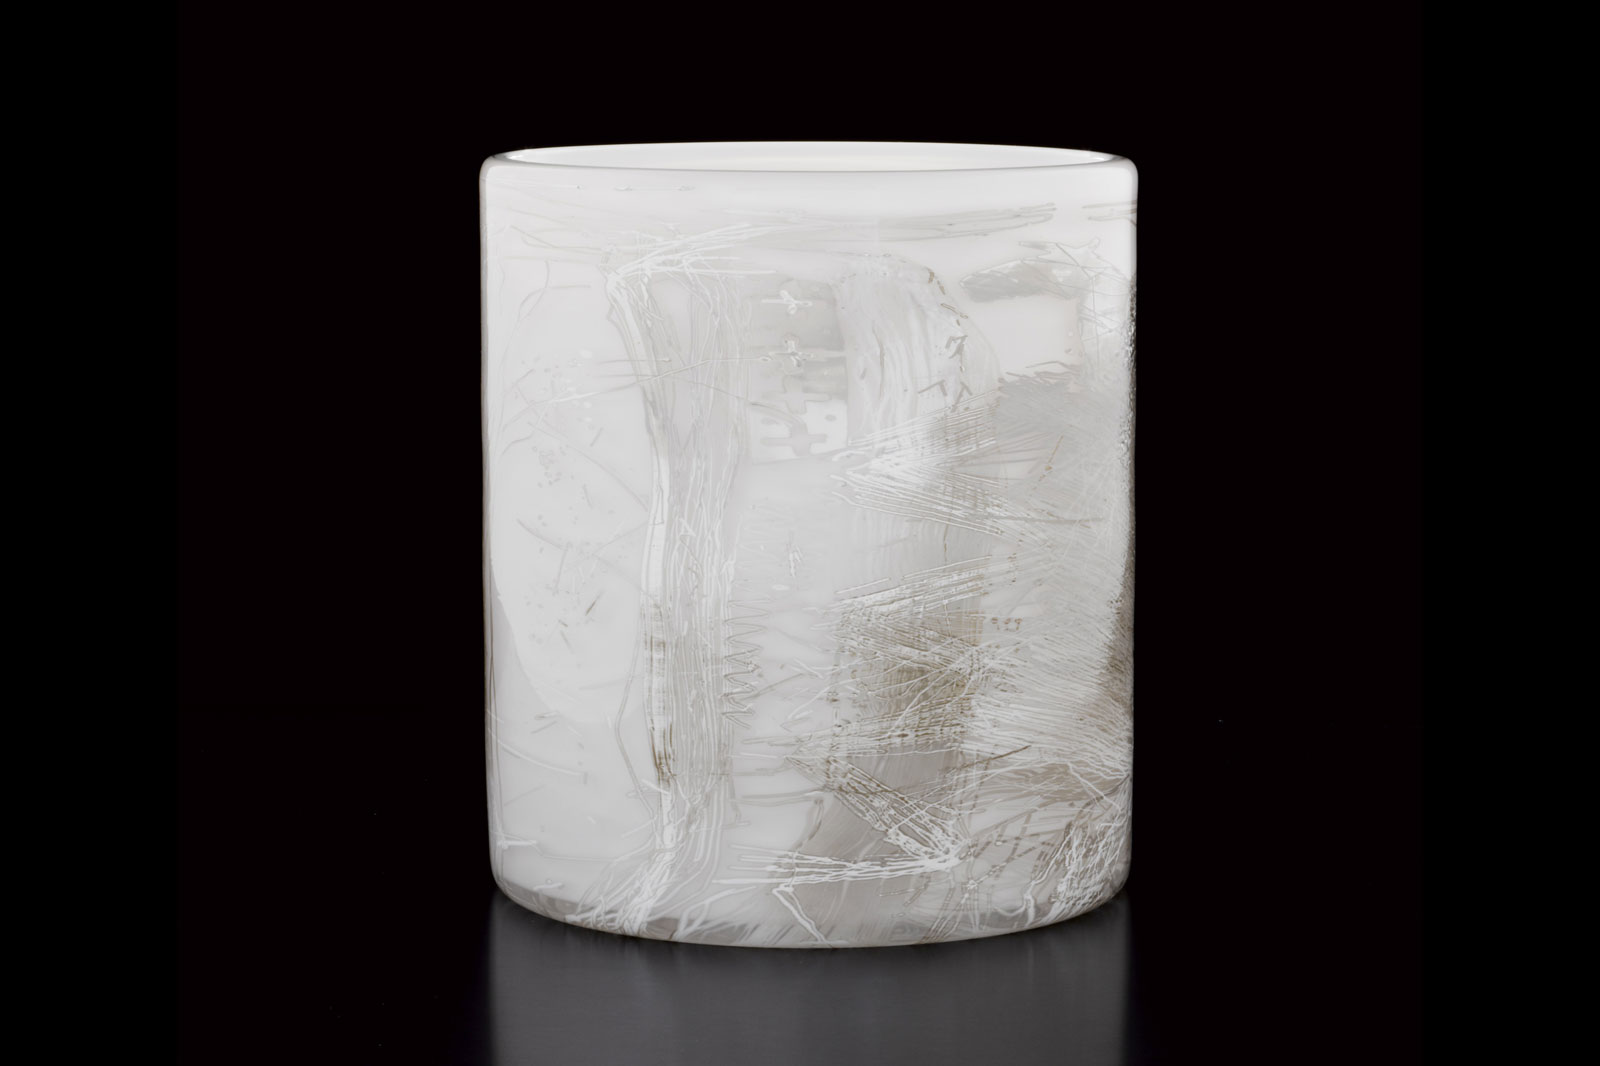 White Cylinder, 2011 by Dale Chihuly